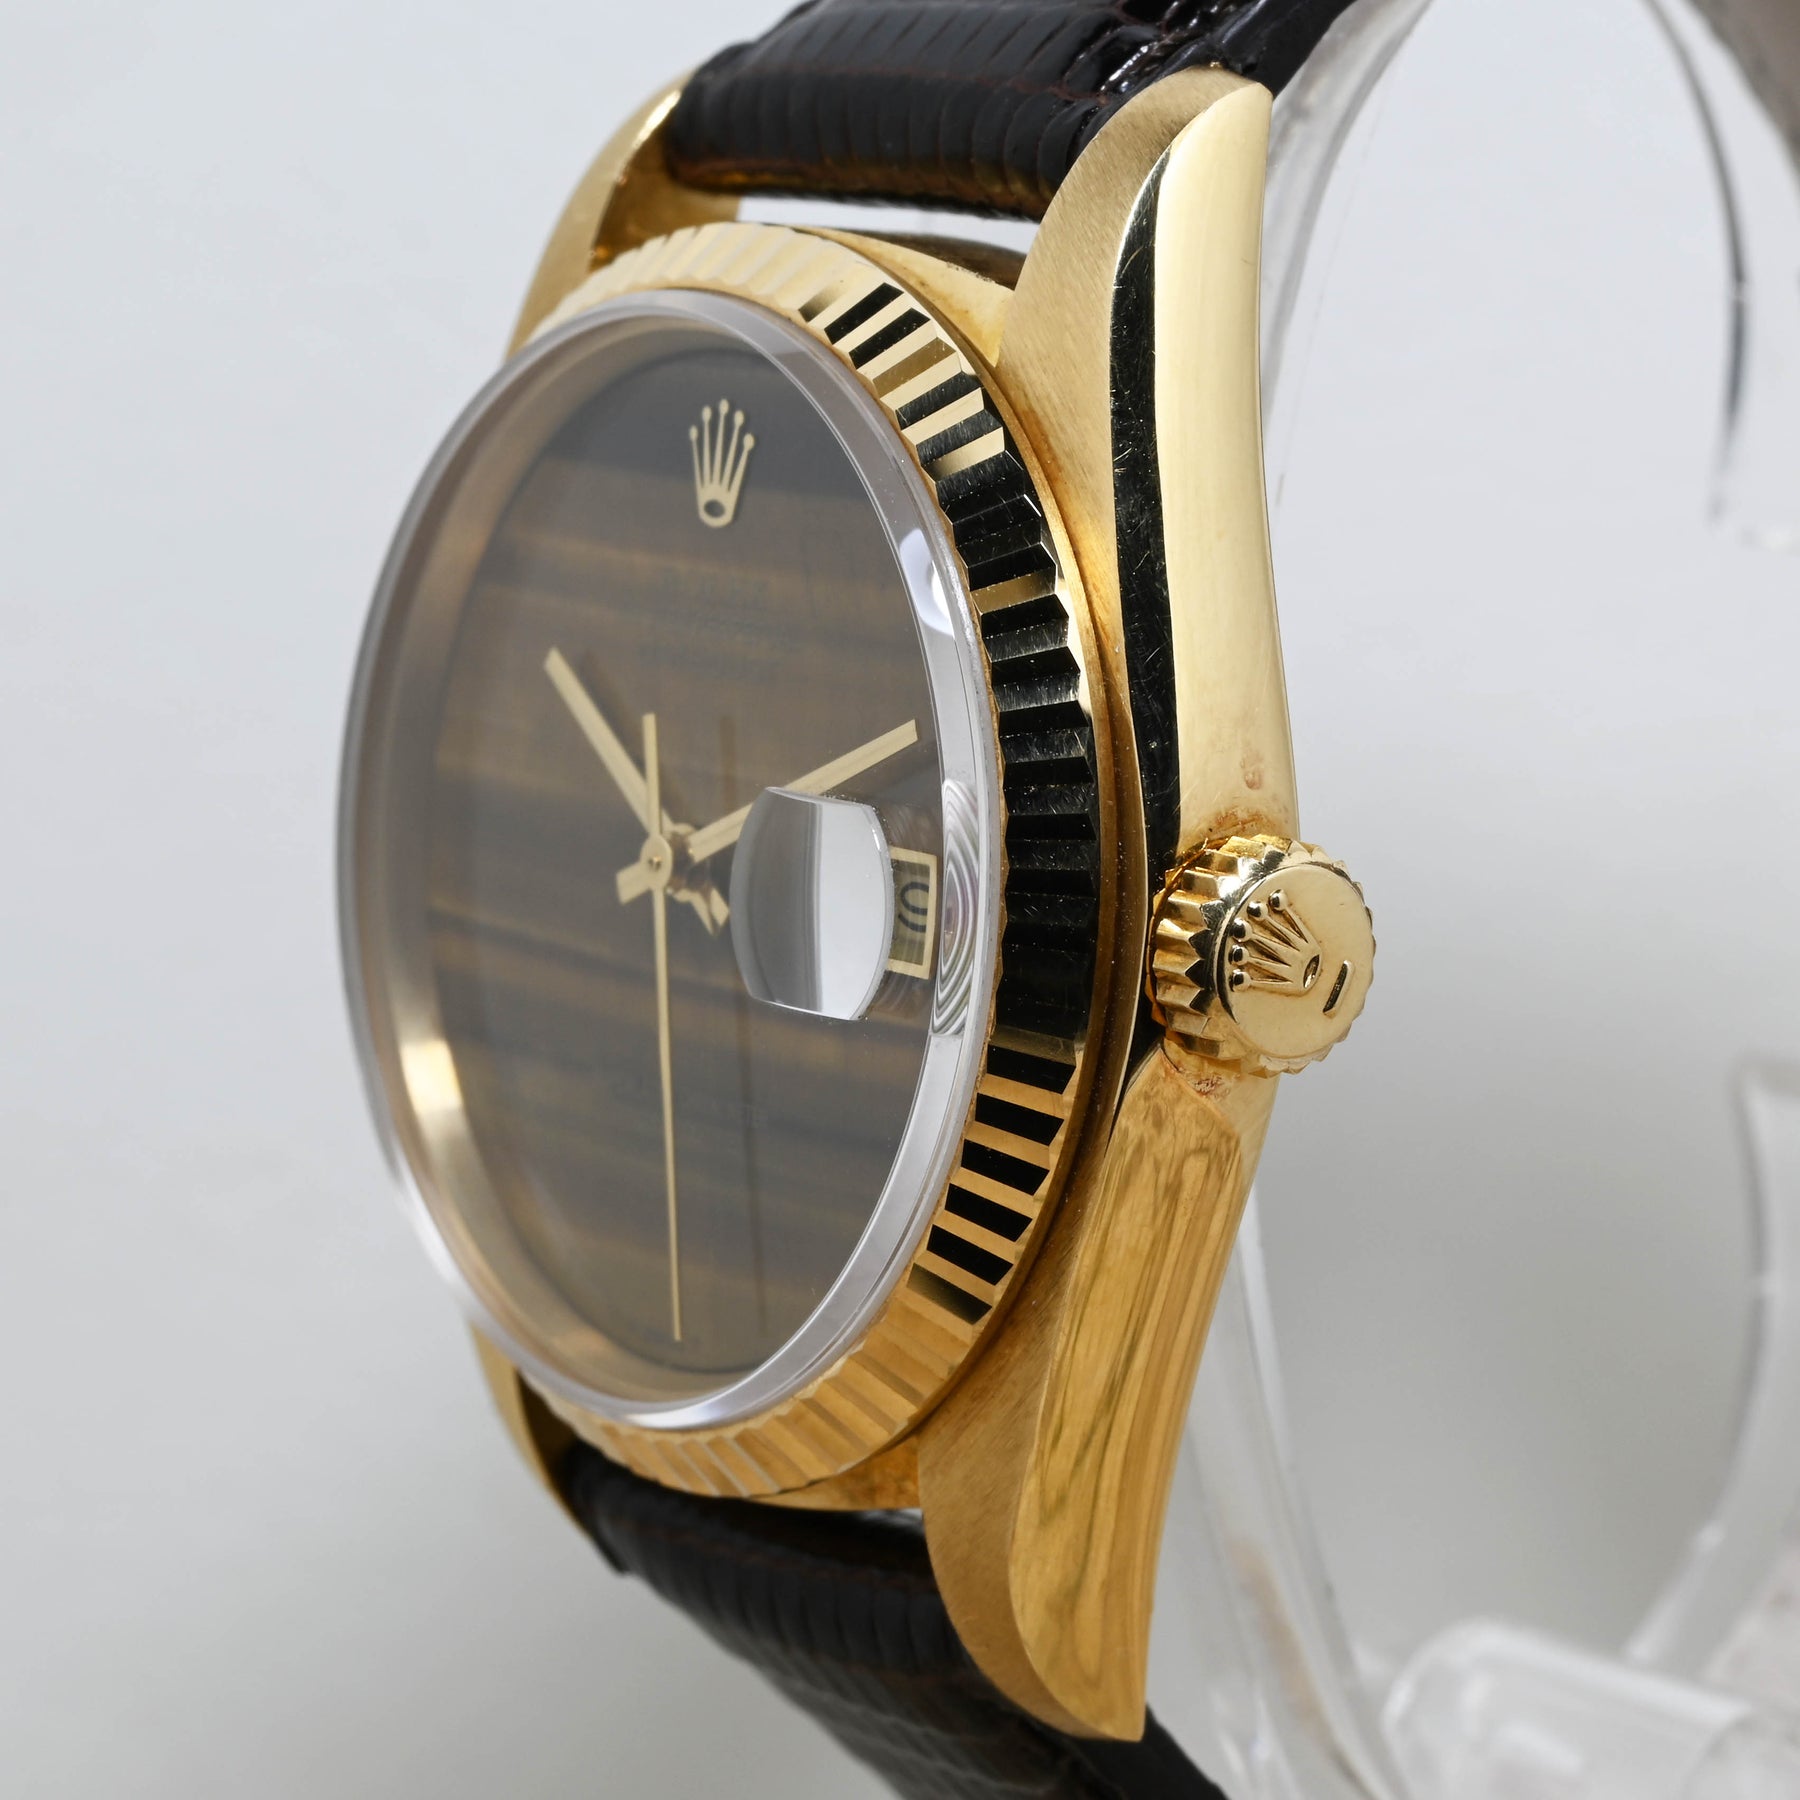 1979 Rolex Datejust Tiger Eye Ref. 16018 (with papers)